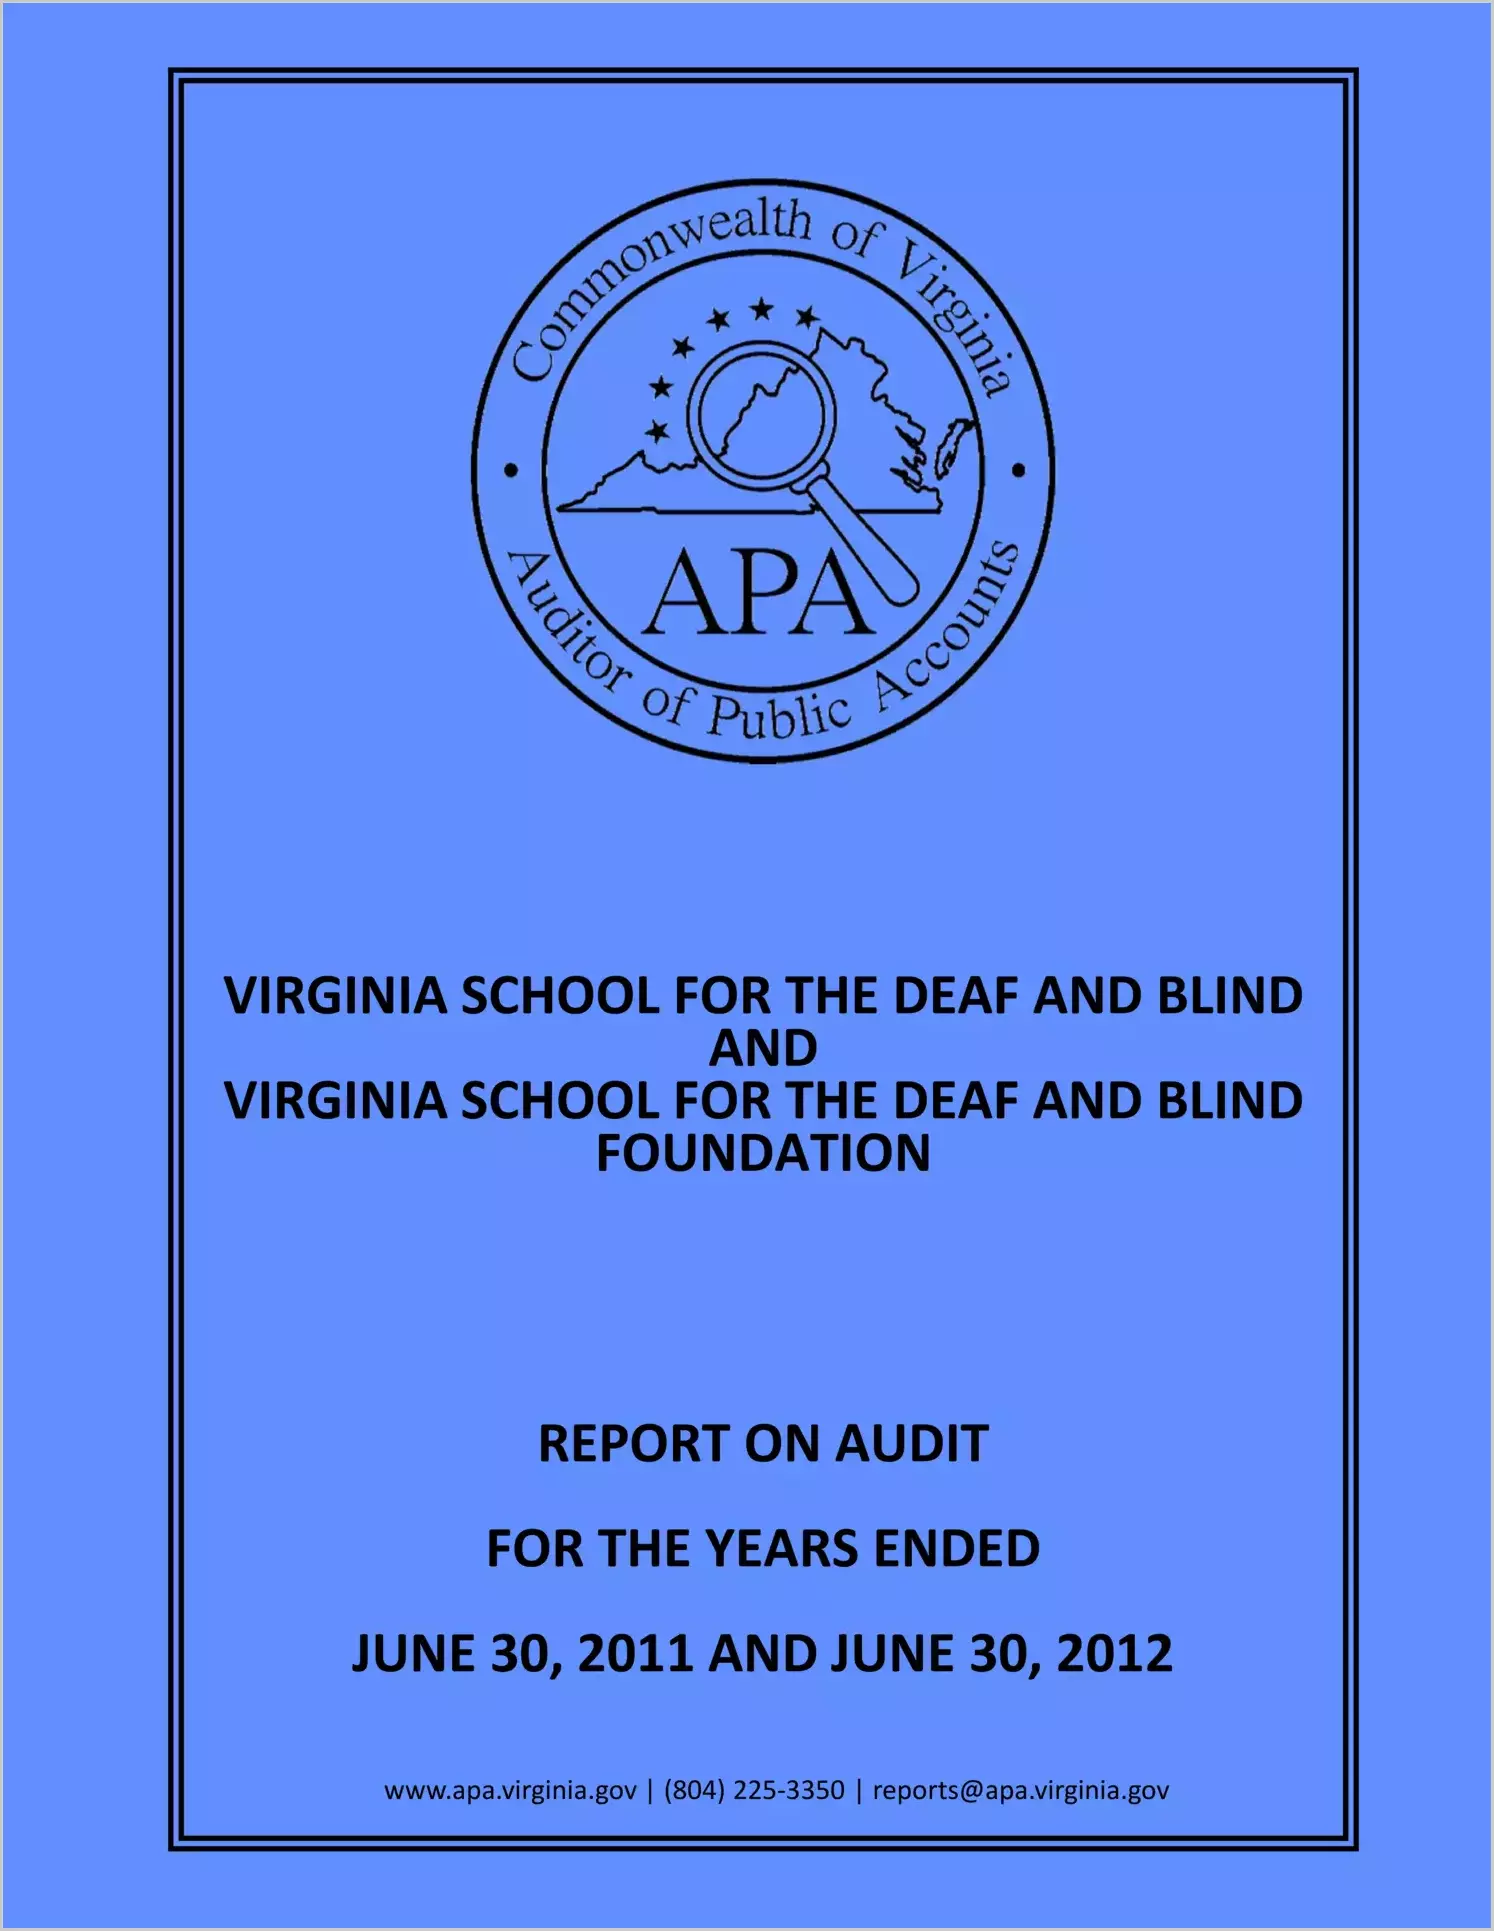 Virginia School for the Deaf and Blind and the Virginia School for the Deaf and Blind Foundation for the years ended June 30, 2011, June 30, 2012